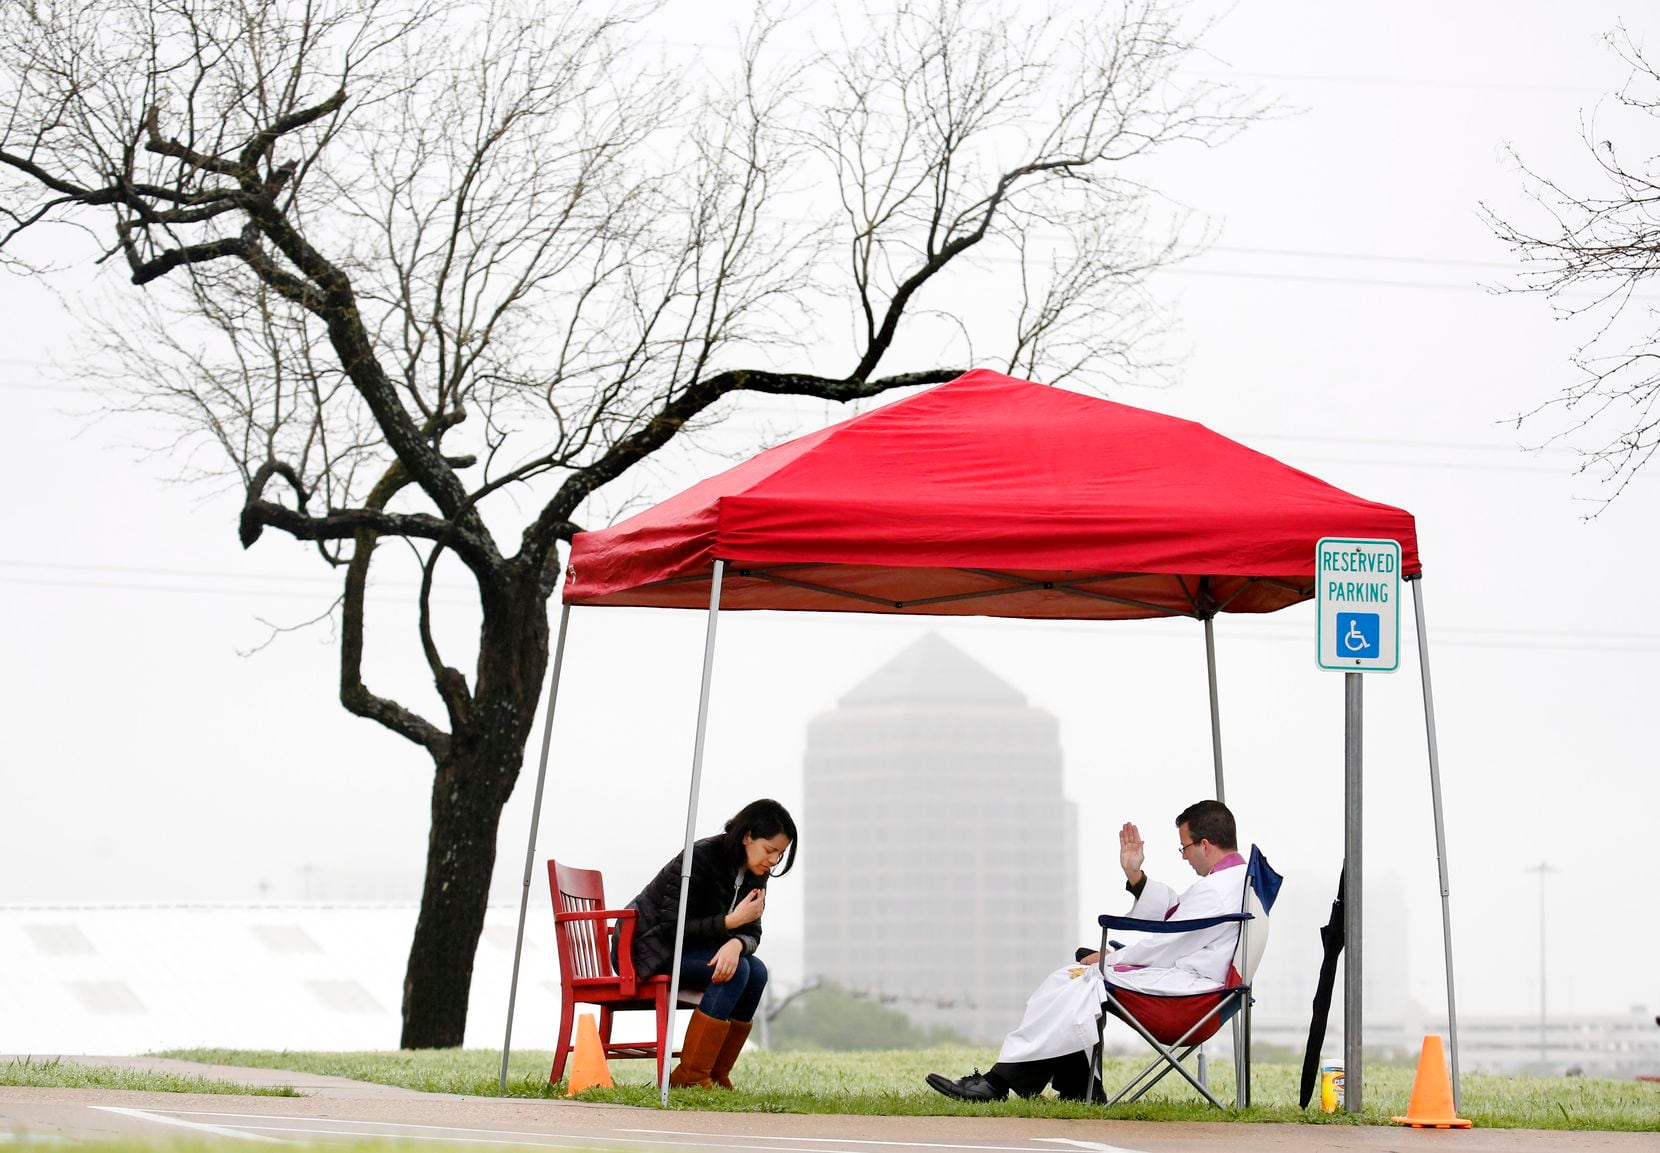 Regnum Christi priest Michael Picard prayed with Anabel Cardova of Coppell during an outdoor...